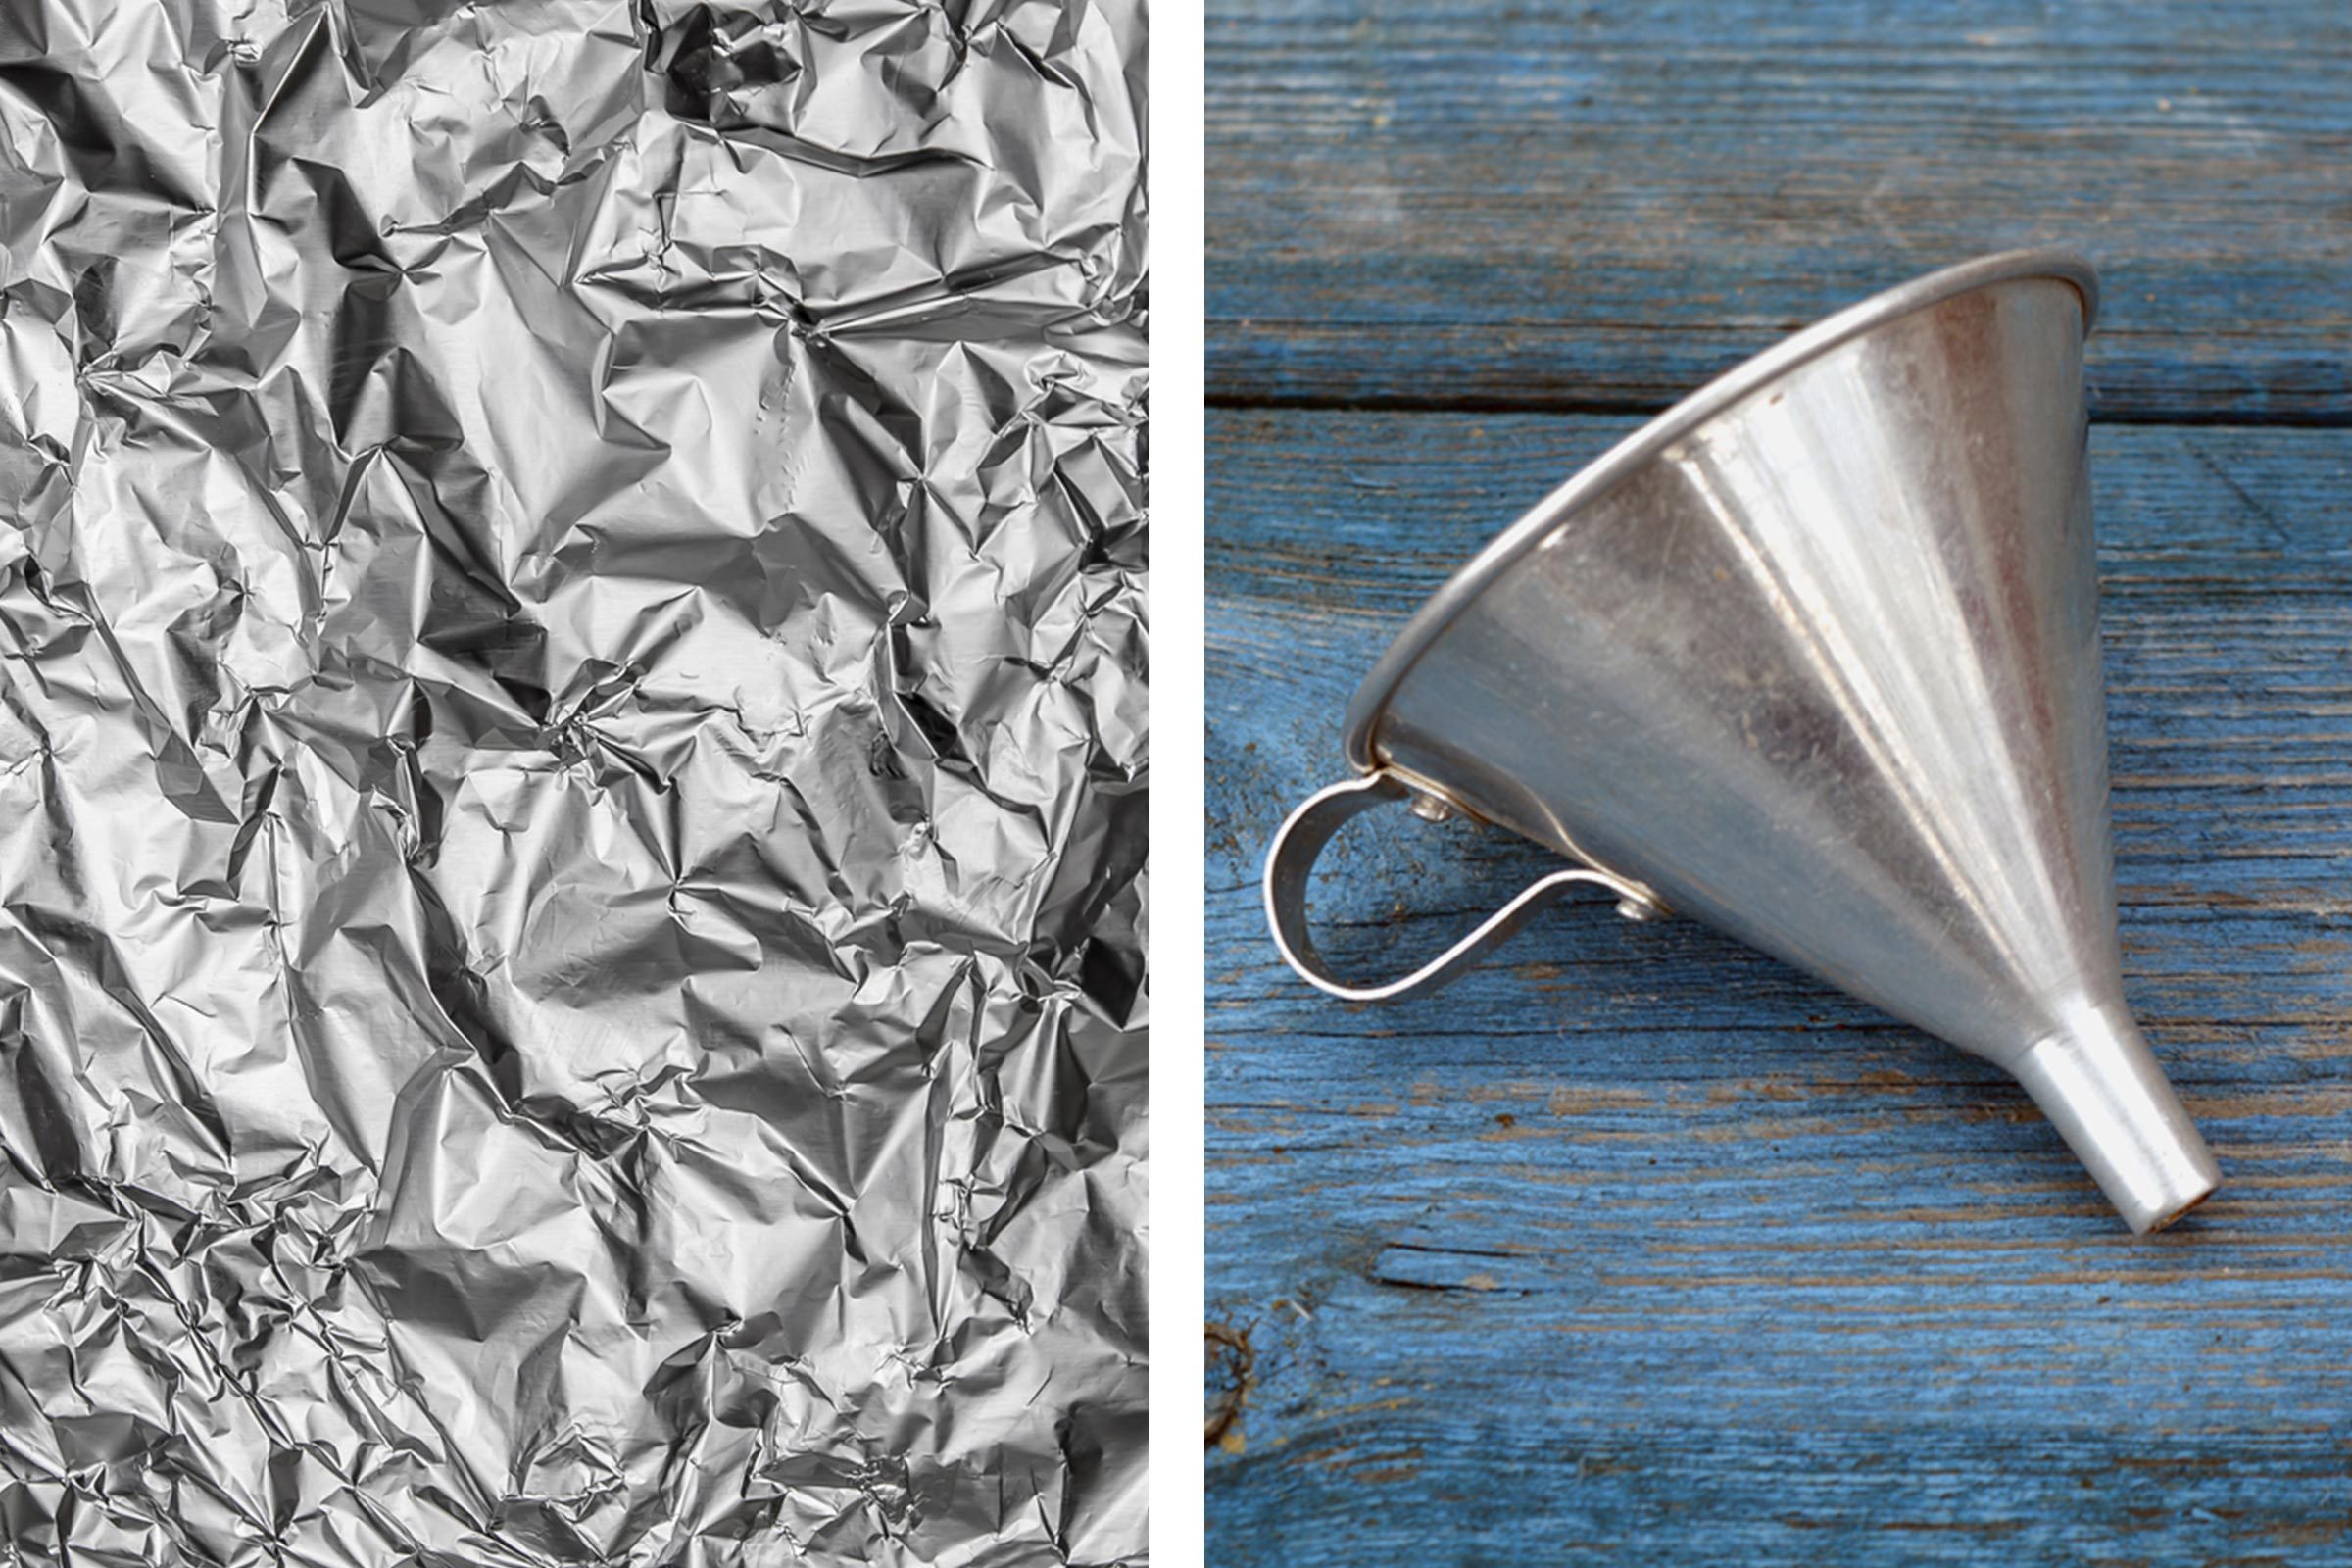 Why is only 1 side of aluminum foil shiny?